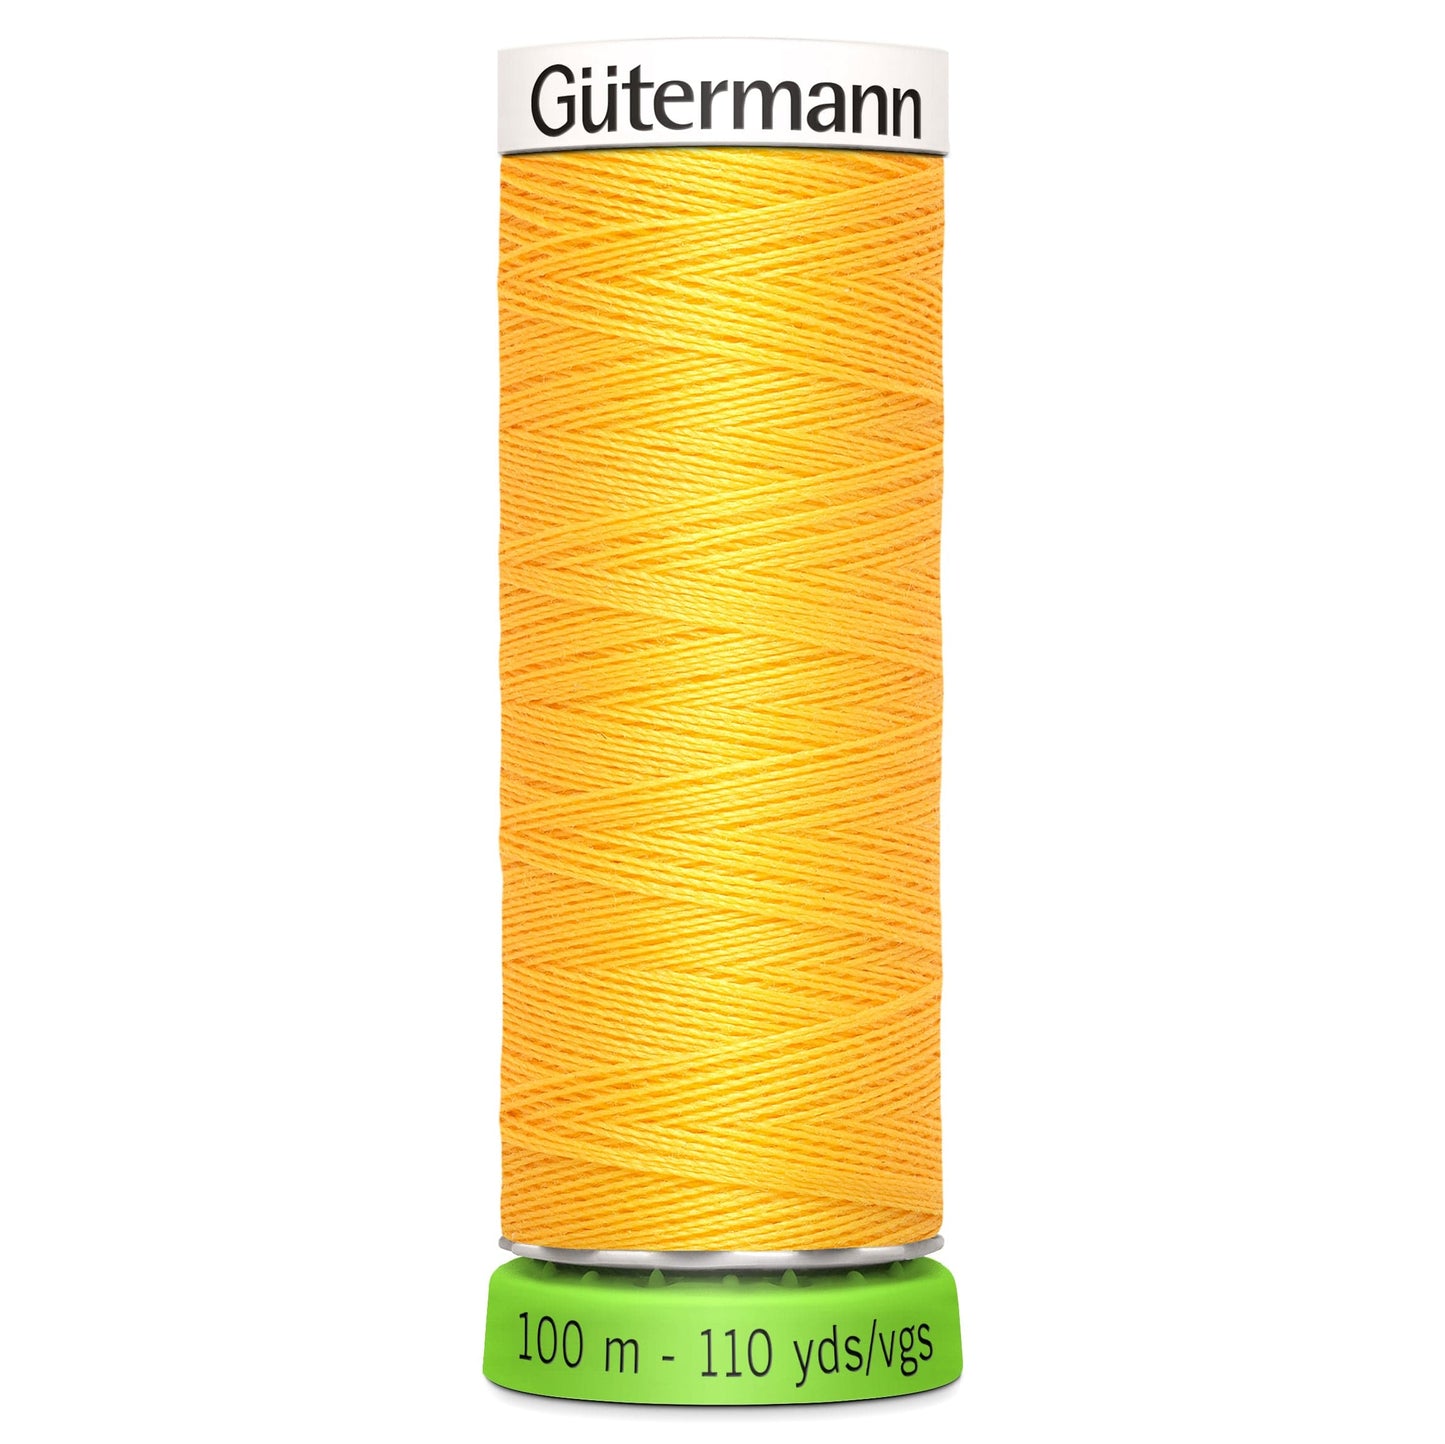 100 m Reel Gütermann Recycled Sew-All Thread in Bright Yellow no. 417